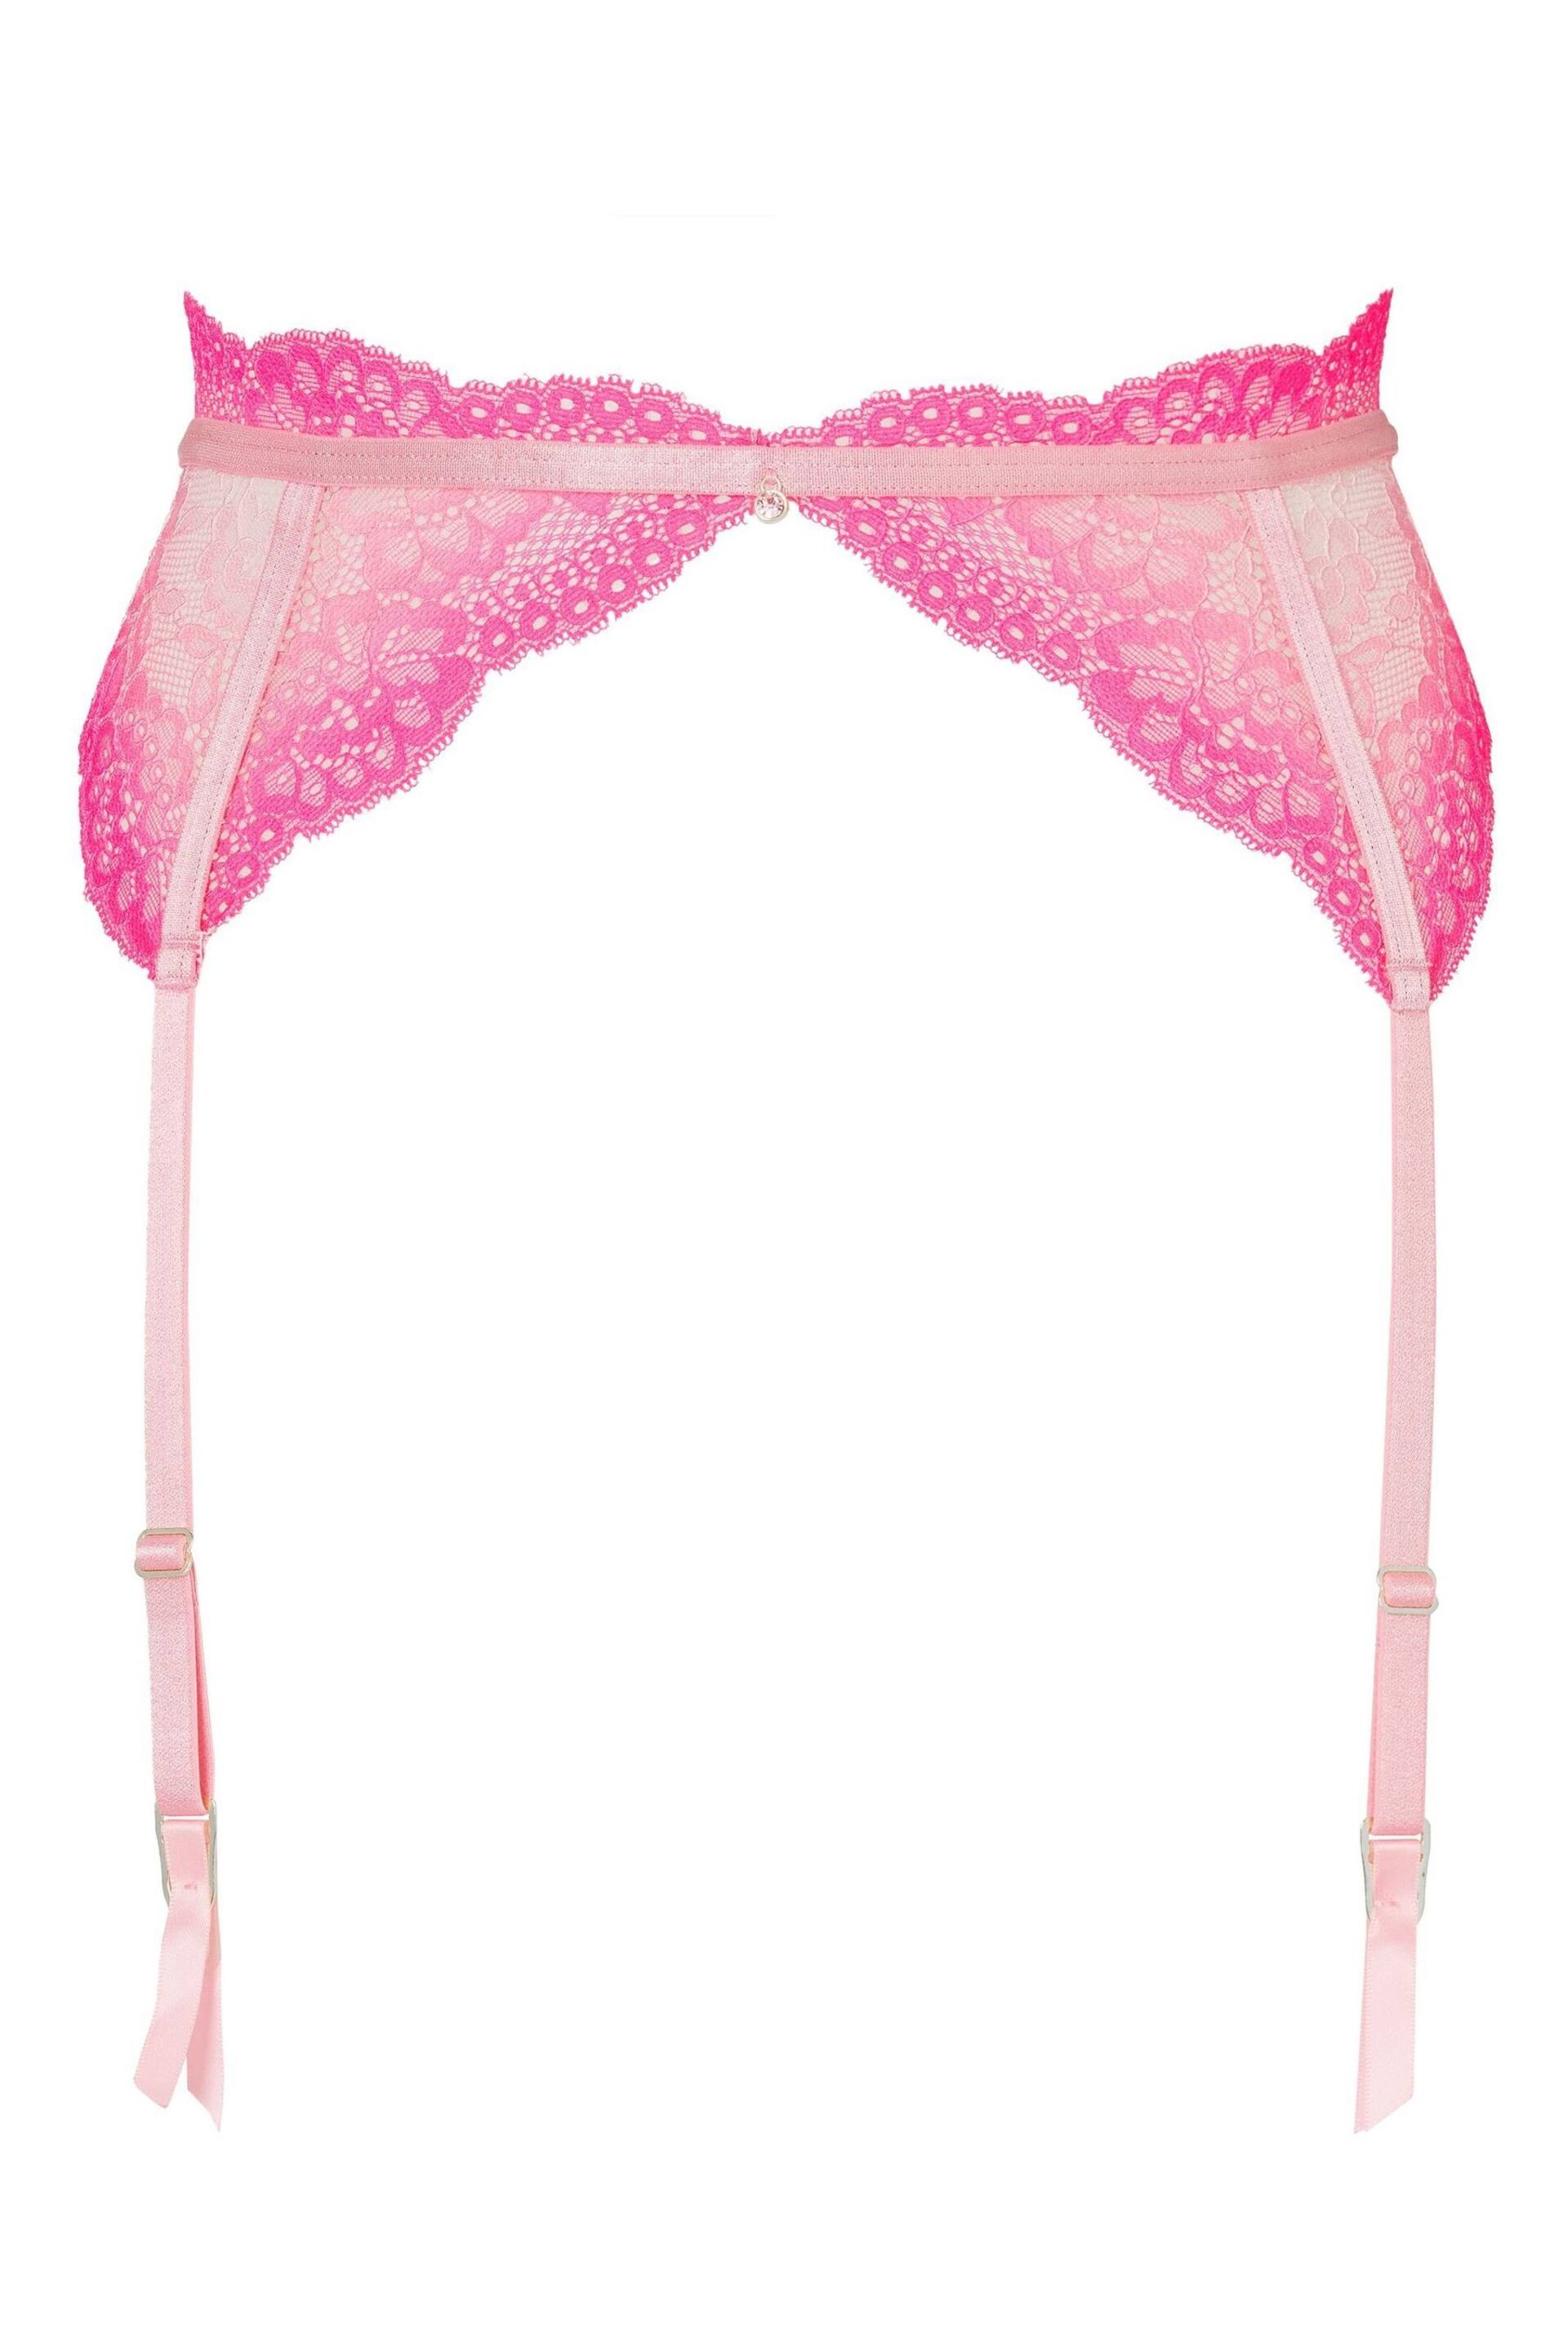 Ann Summers Sexy Lace Planet Suspender Belt - Image 4 of 4